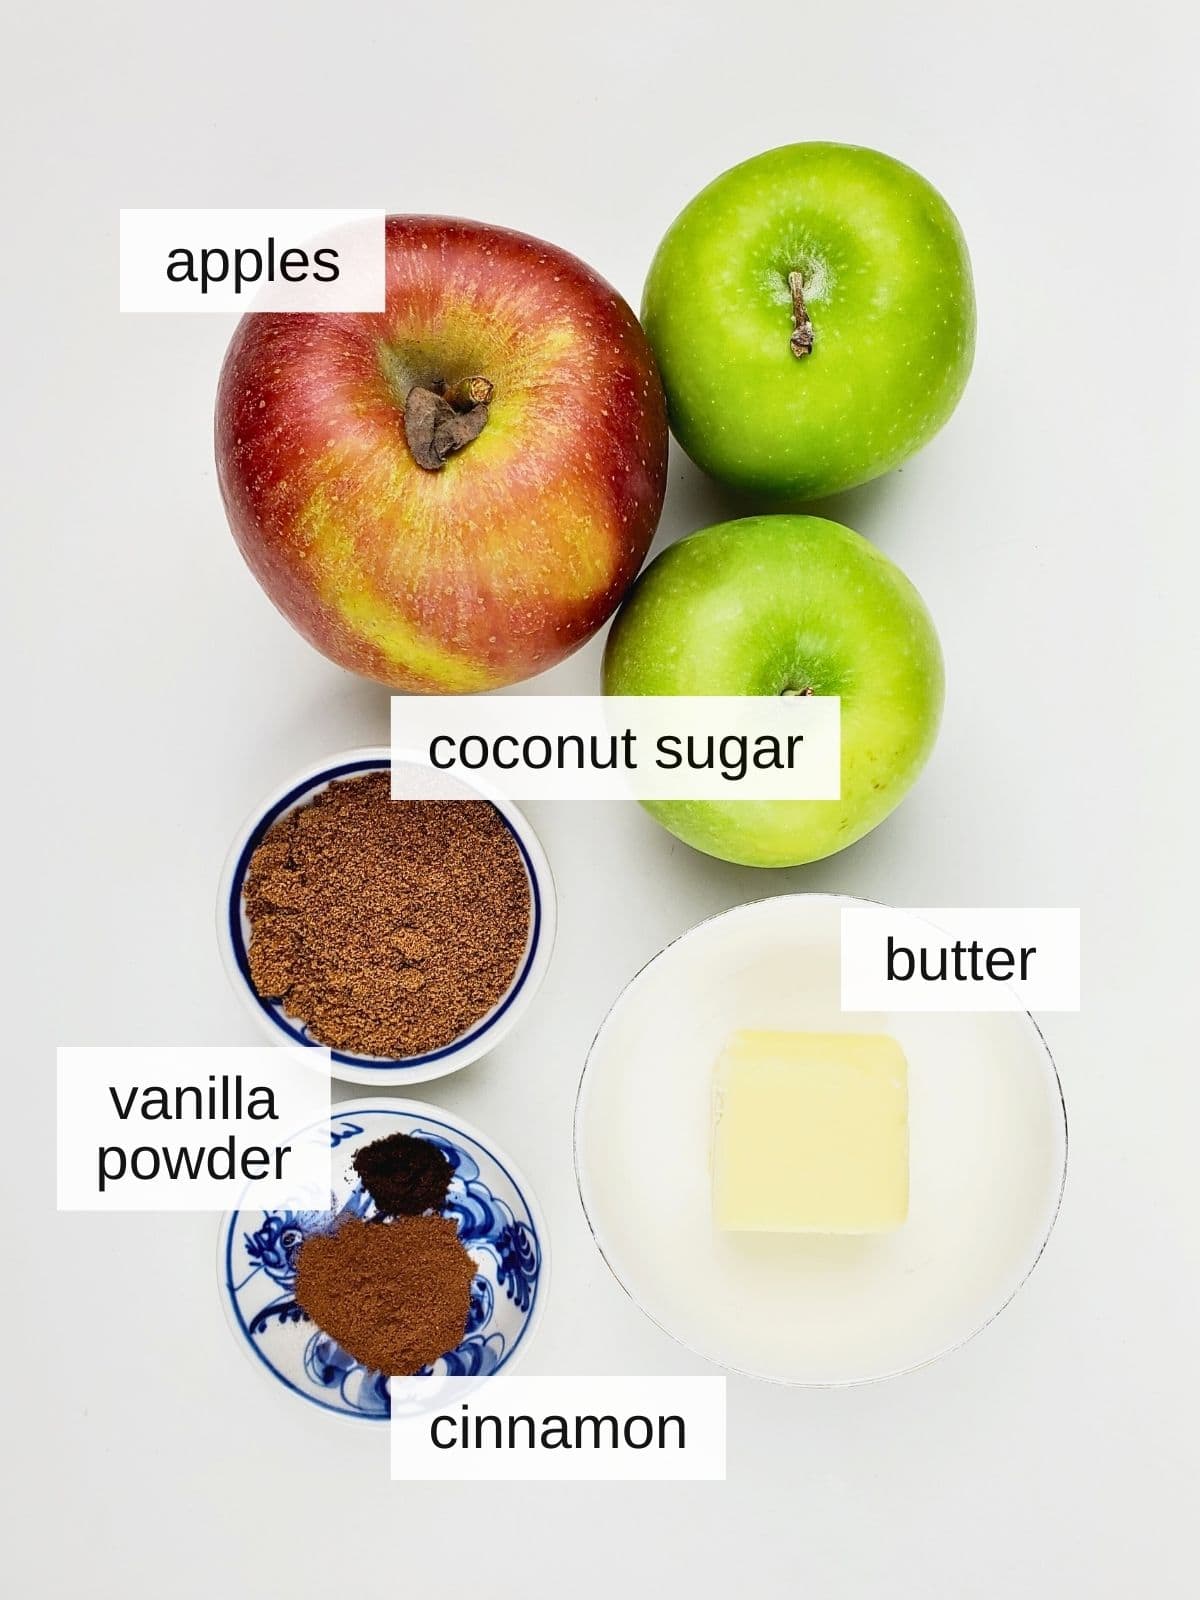 ingredients for caramelized apples, including apples, coconut sugar, butter, vanilla powder, and cinnamon.